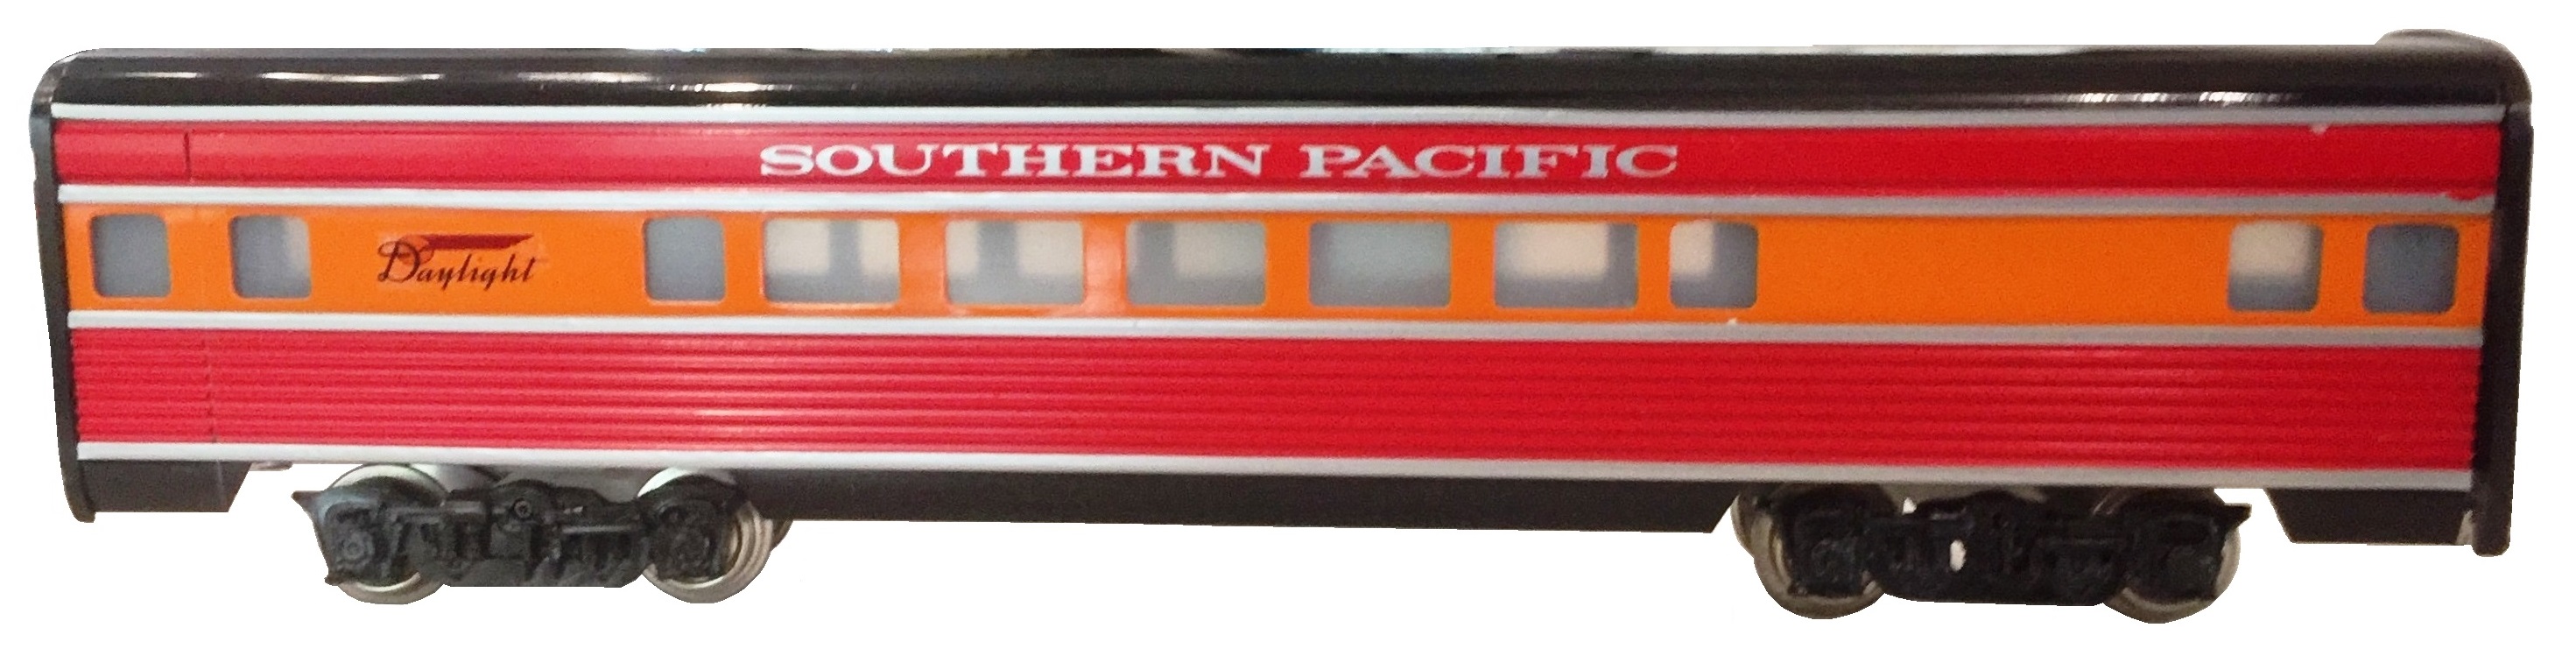 Lee Lines Standard gauge Southern Pacific Daylight Streamlined Passenger Cars